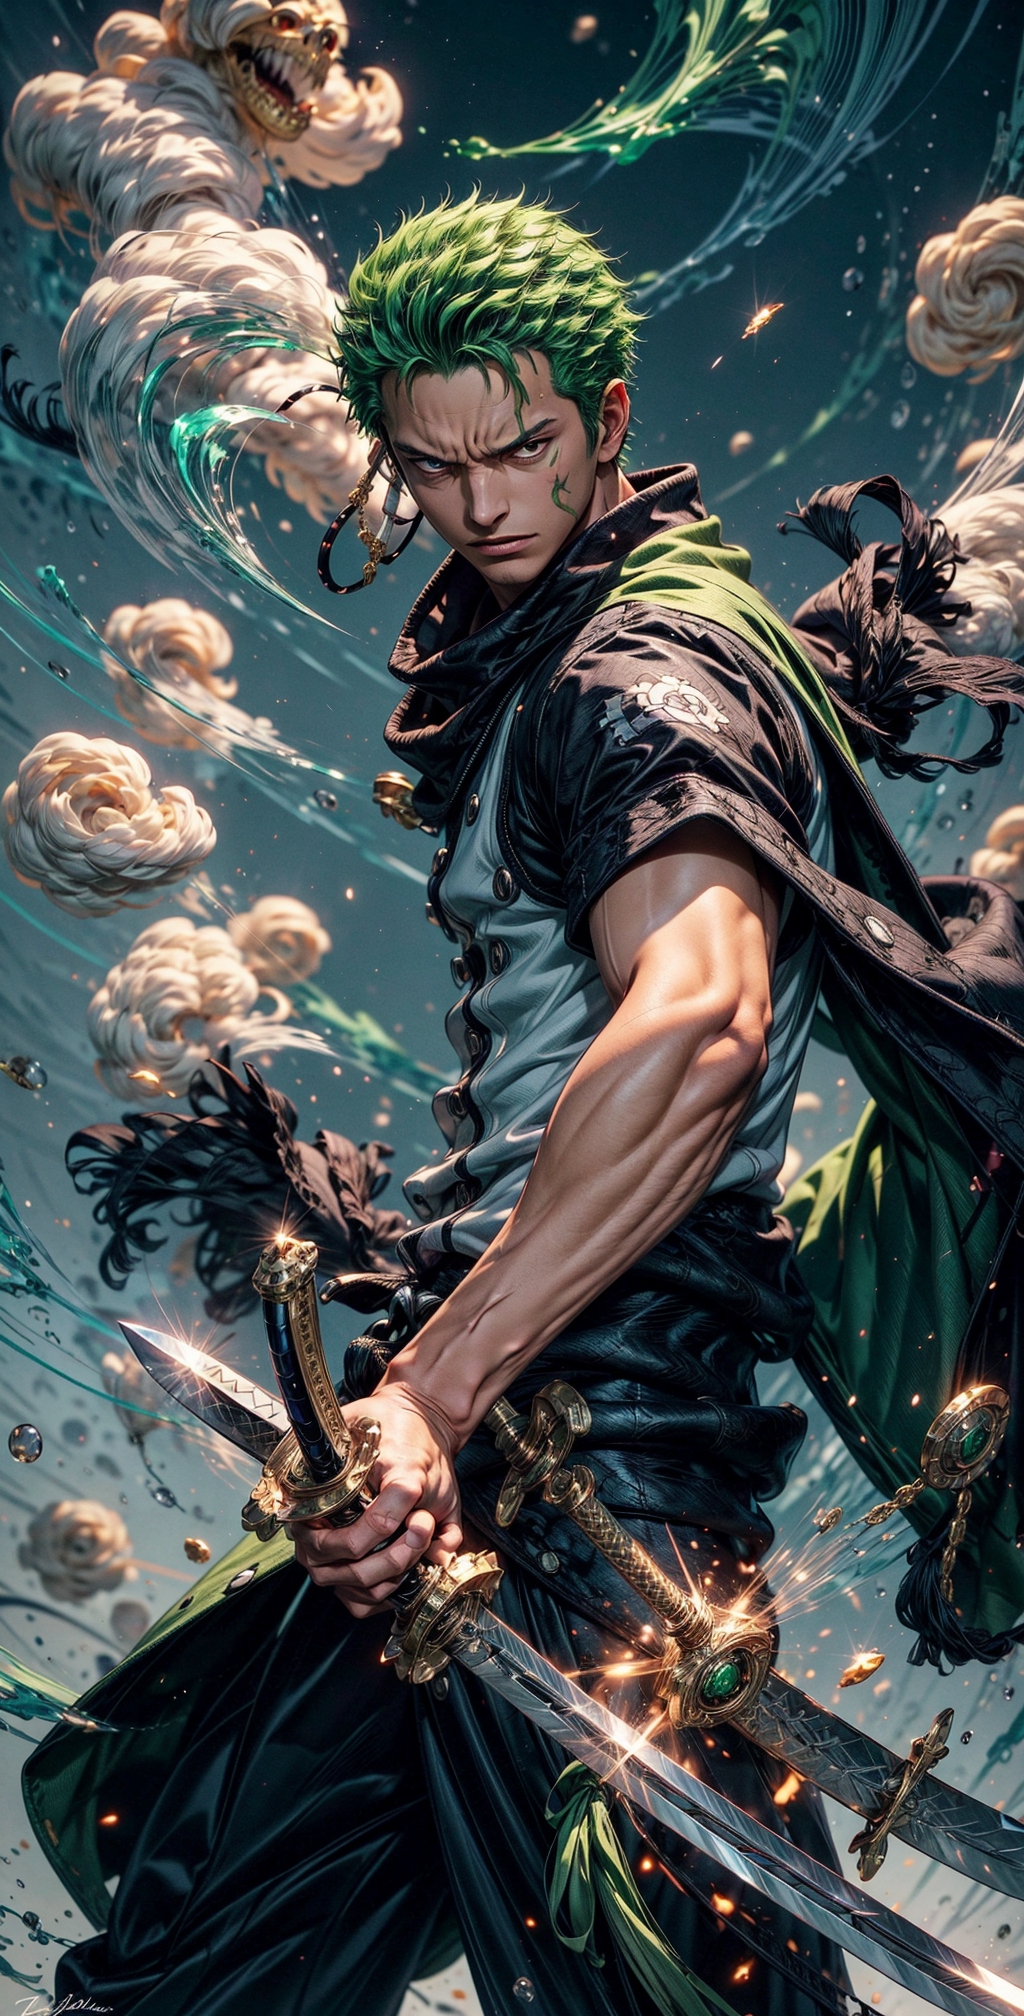 Live Wallpapers tagged with Zoro